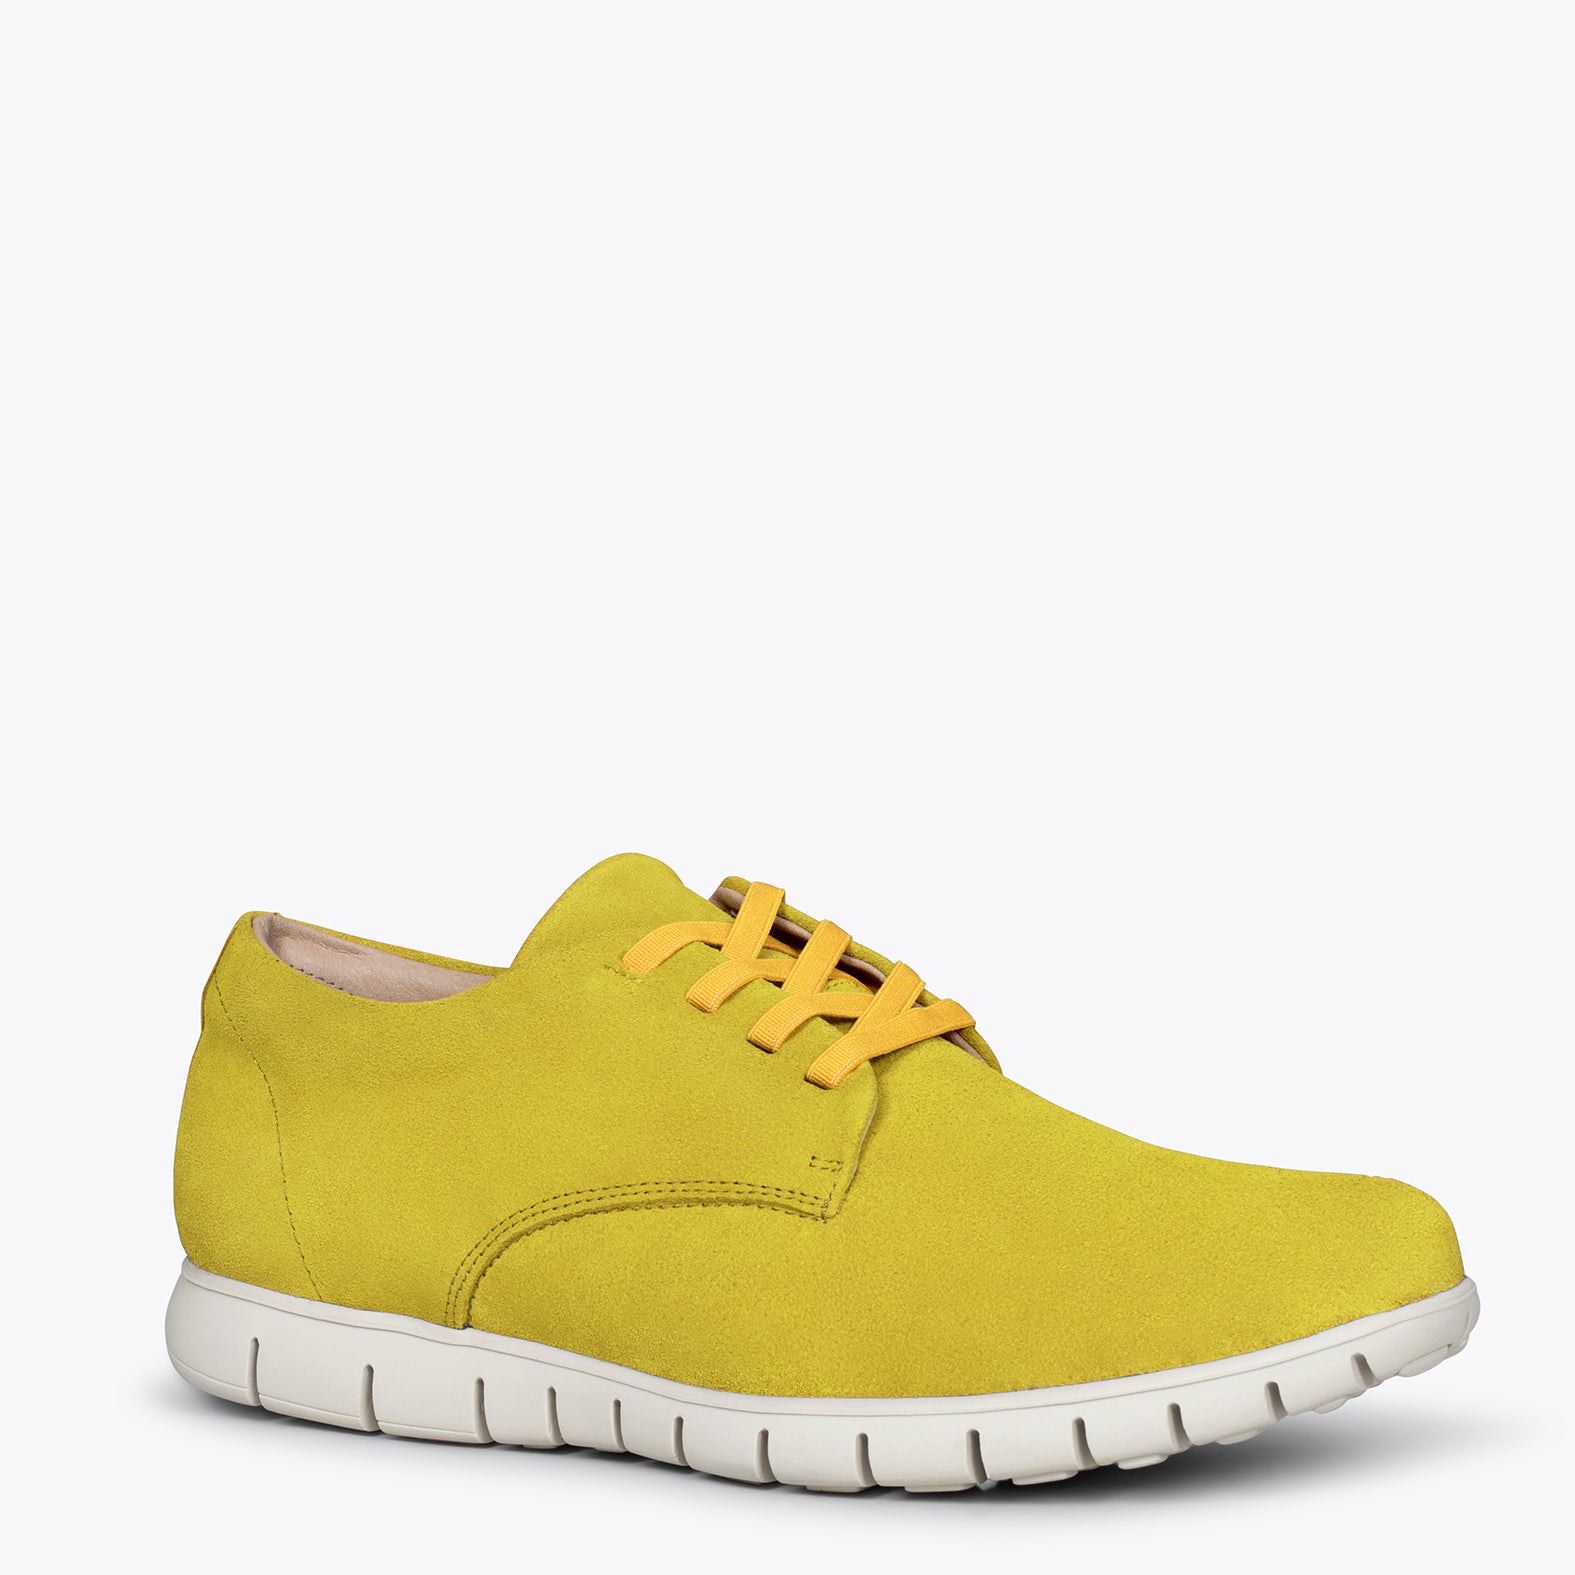 360 – YELLOW sport shoes for men